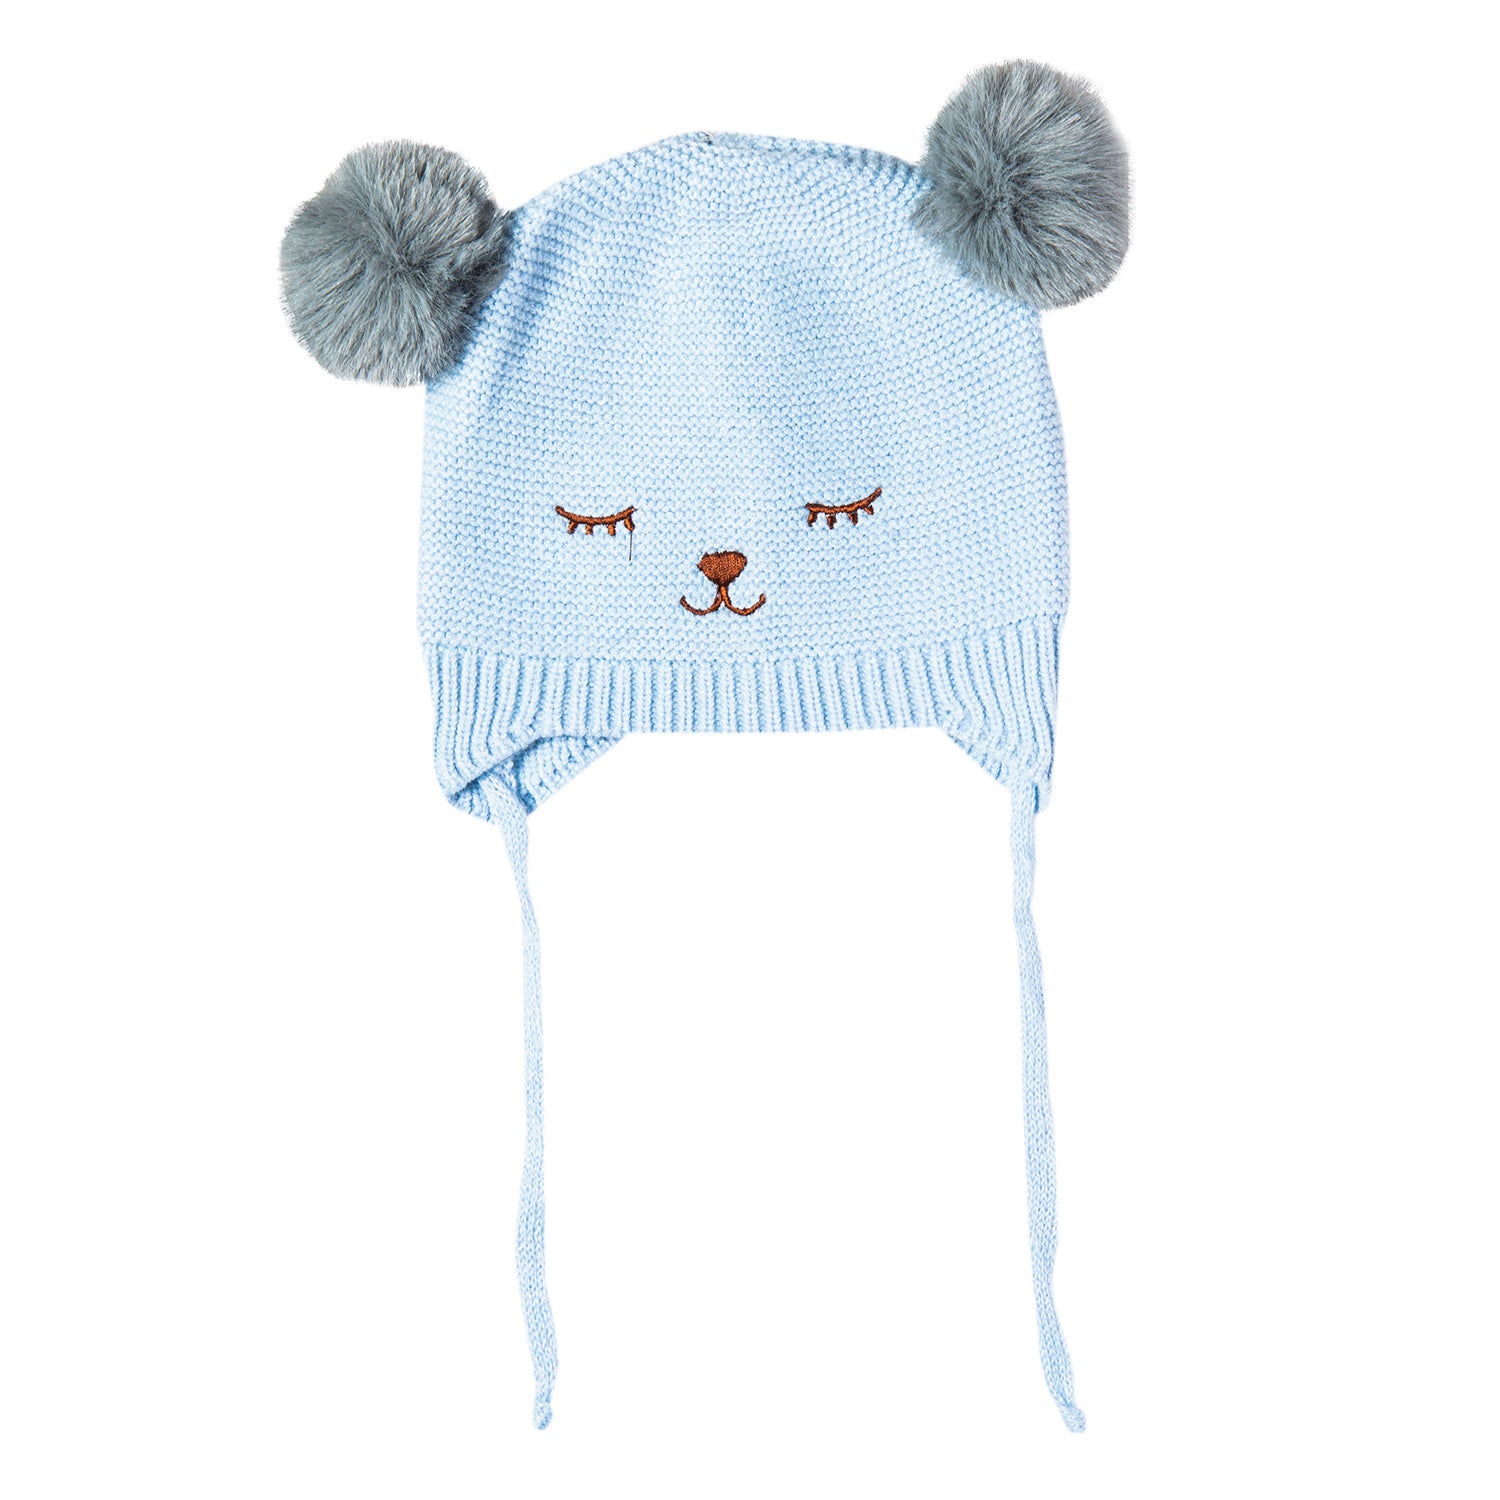 Knit Woollen Cap With Tie Knot For Ear Cover Sleeping Pom Pom Blue